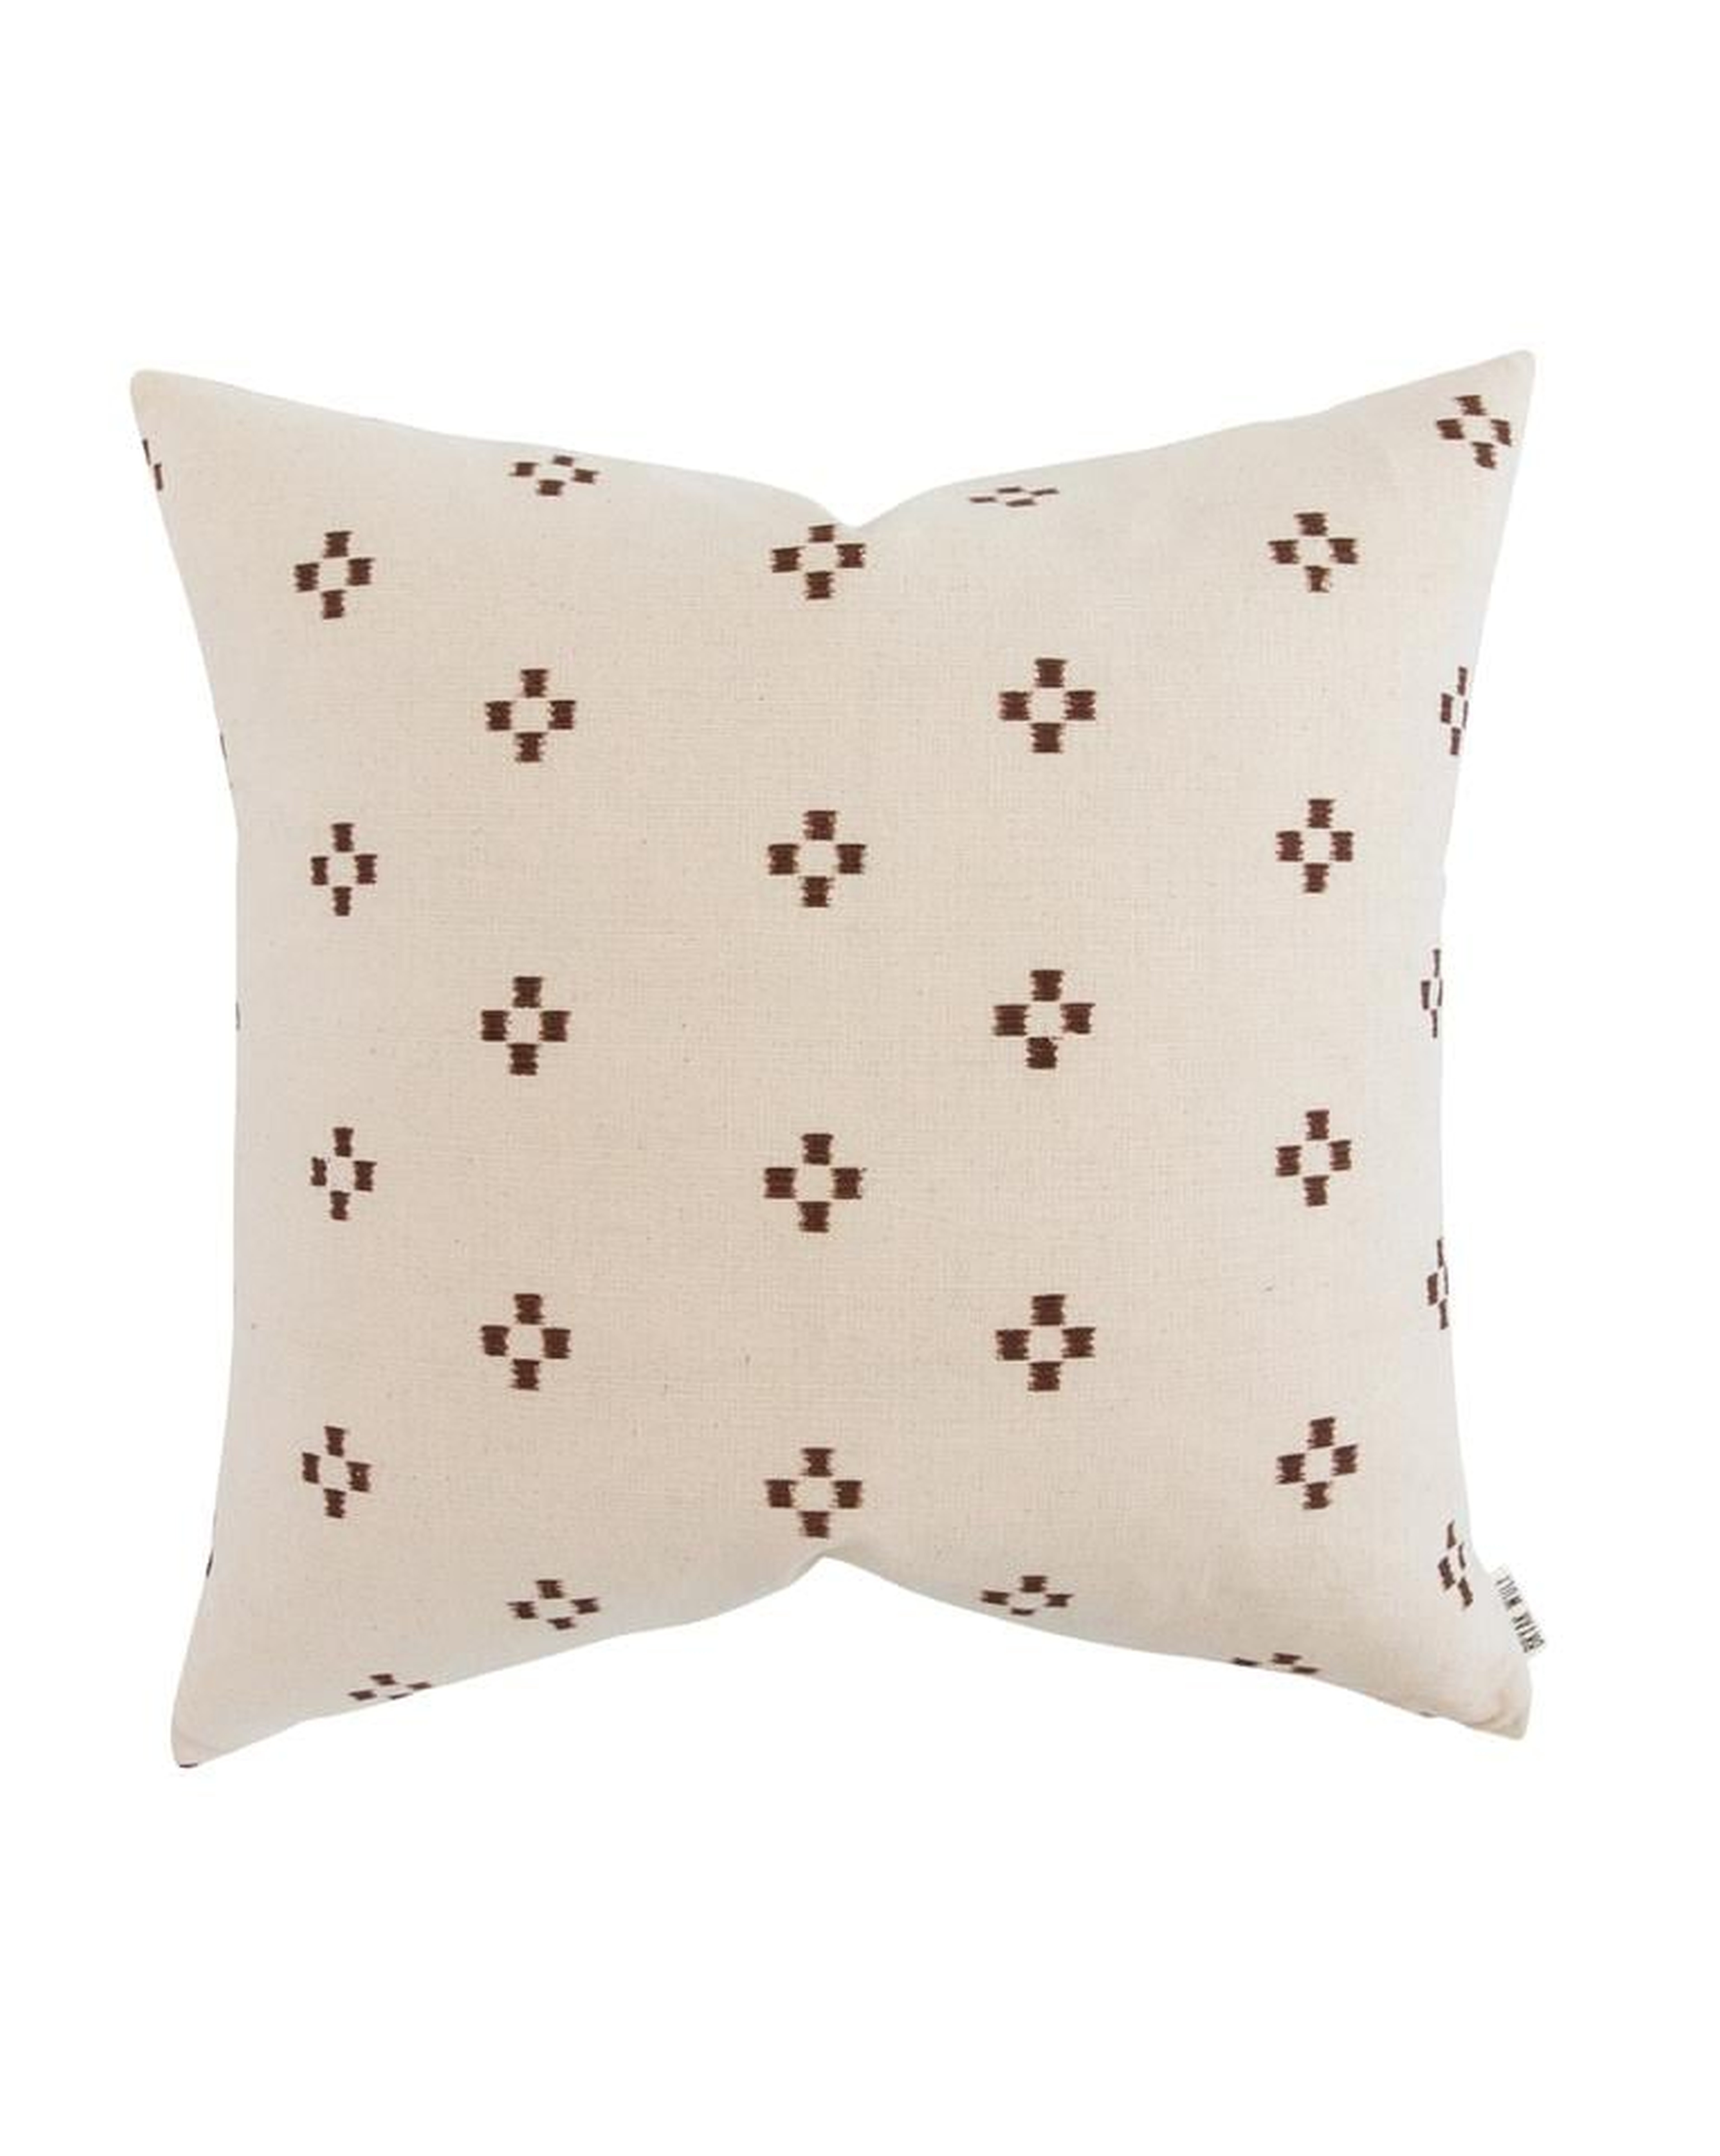 ABREE PILLOW - McGee & Co.